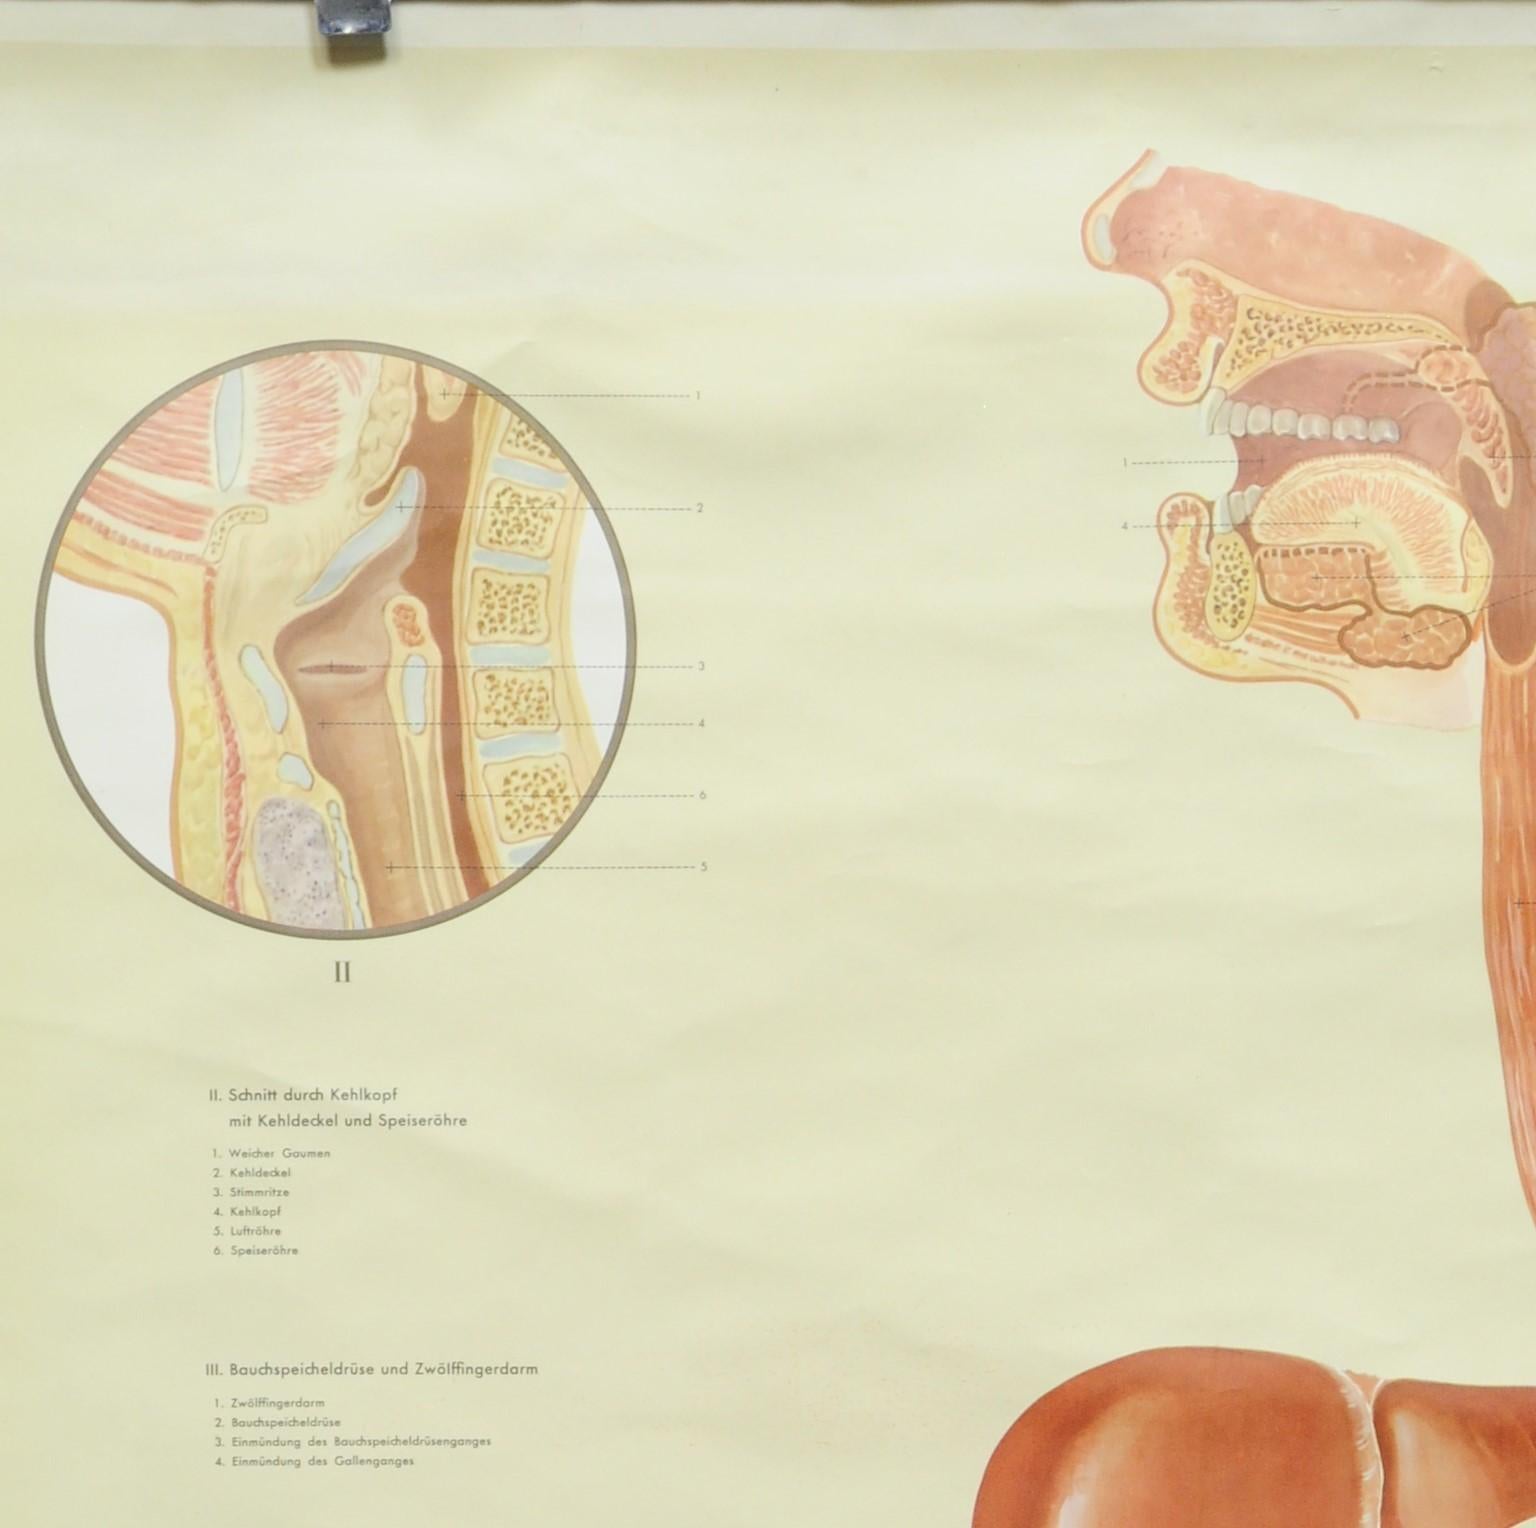 A classical anatomical pull-down medical wall chart illustrating the human digestive organs. Published by Ernst Klett Verlag Stuttgart 1958. Colorful print on paper reinforced with canvas. 
Measurements:
Width 84cm (33.07 inch)
Height 115cm (45.28